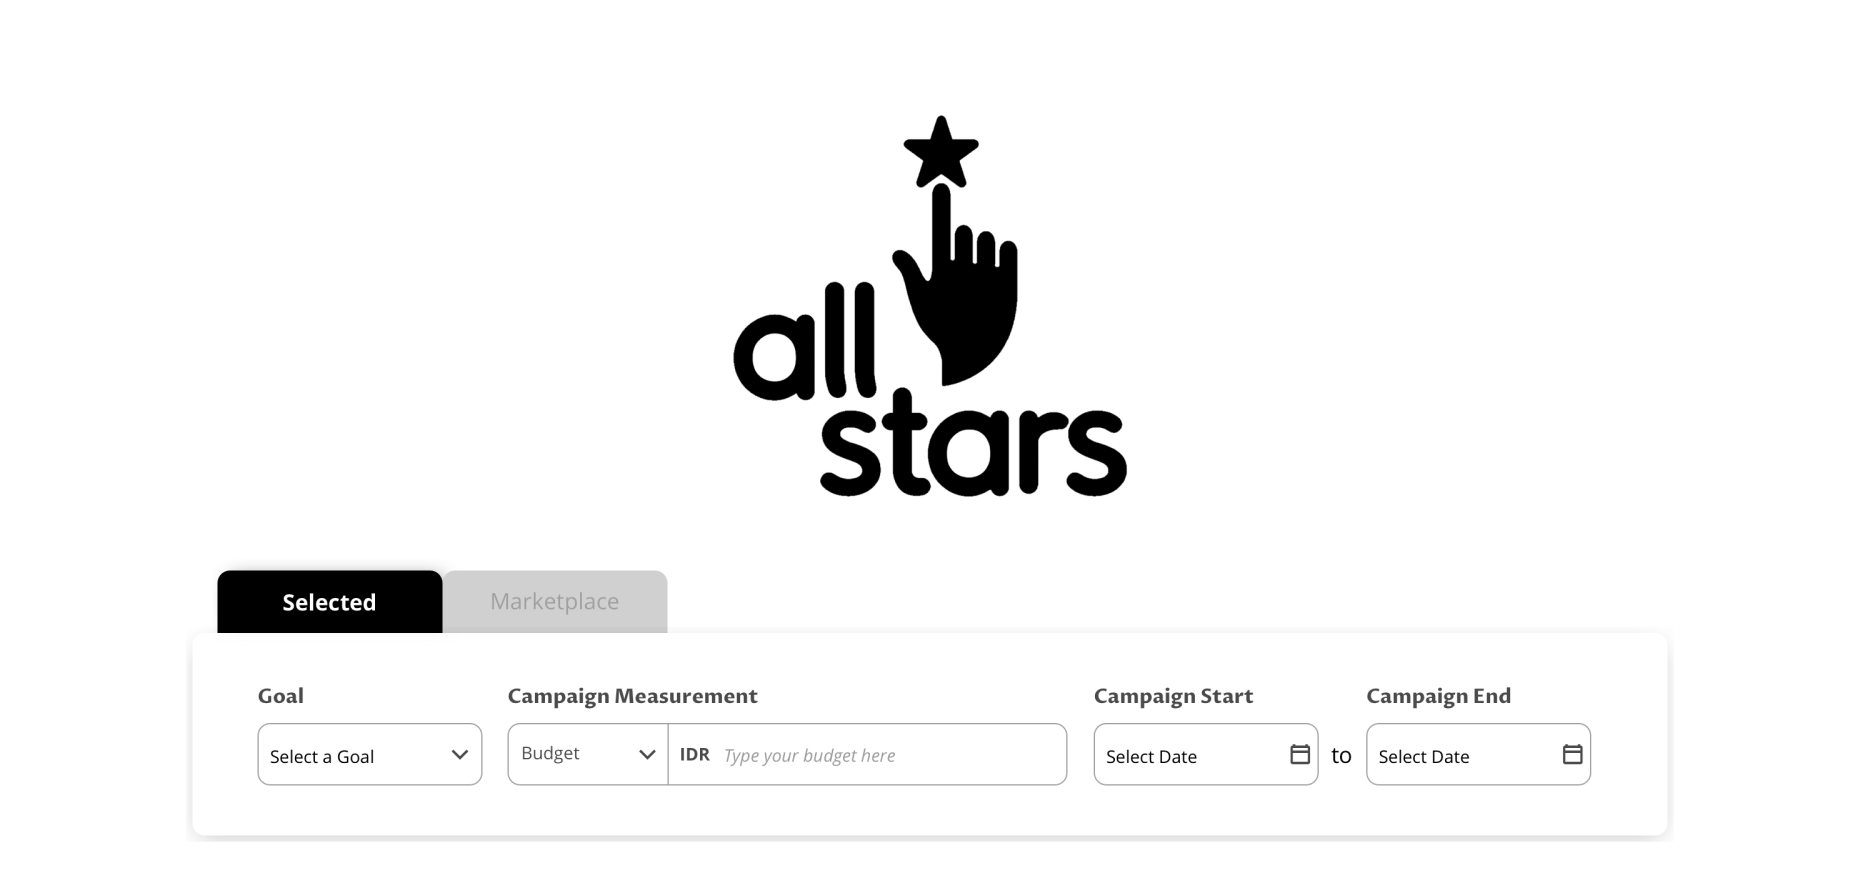 Allstars Indonesia: Practical UX Design for influencers and brand owners